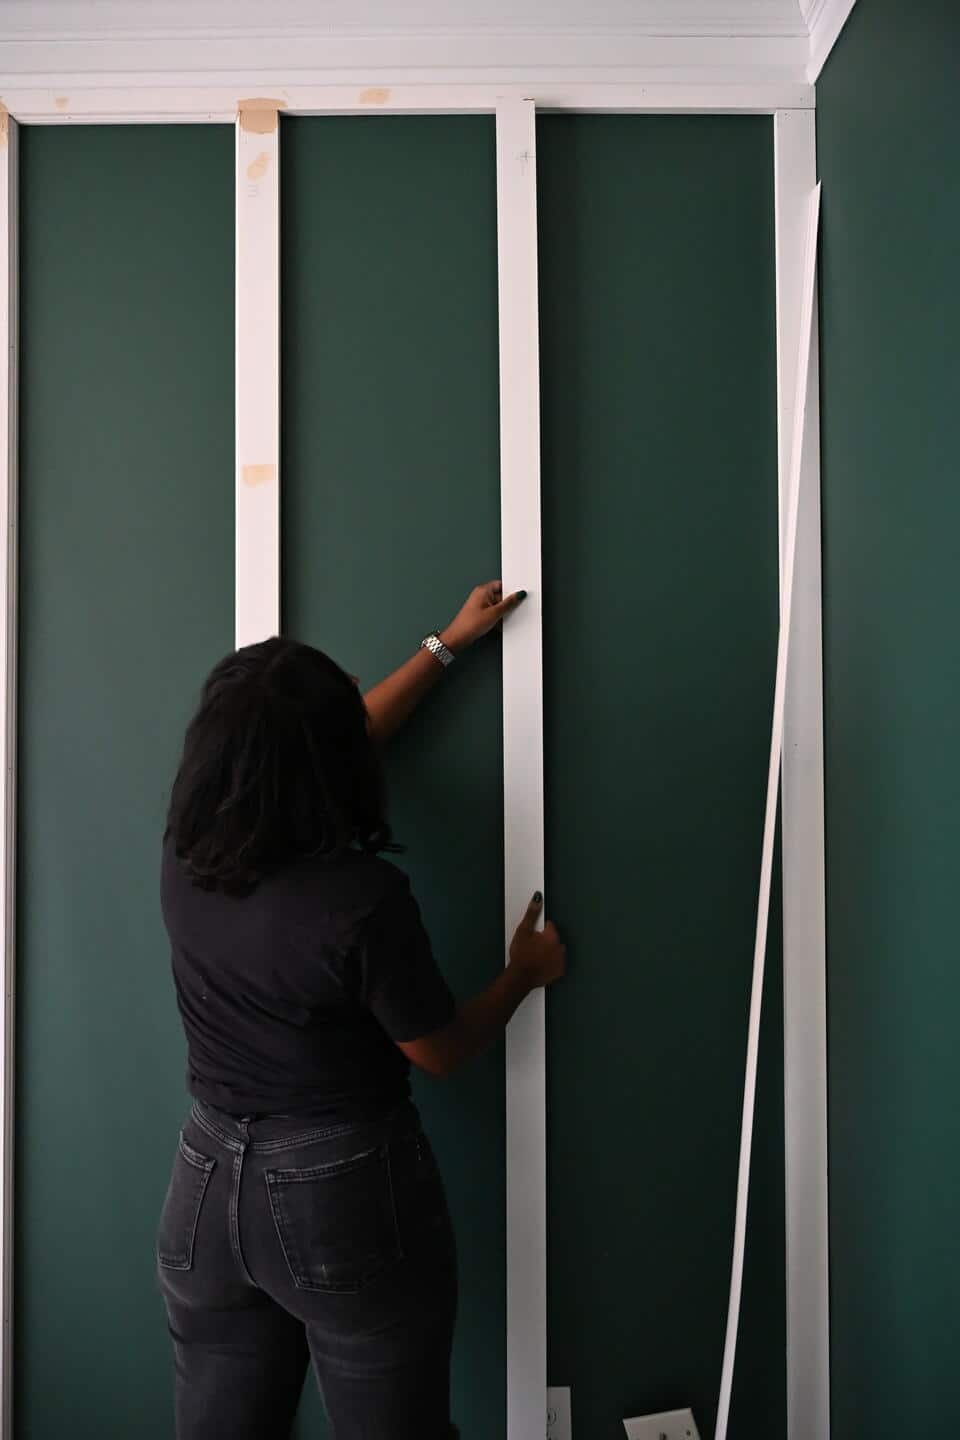 Lauren working to install the wood wall boards to add texture to the walls in the office transfoamation. The boards are white, but will be painted green once the transformation is completed.